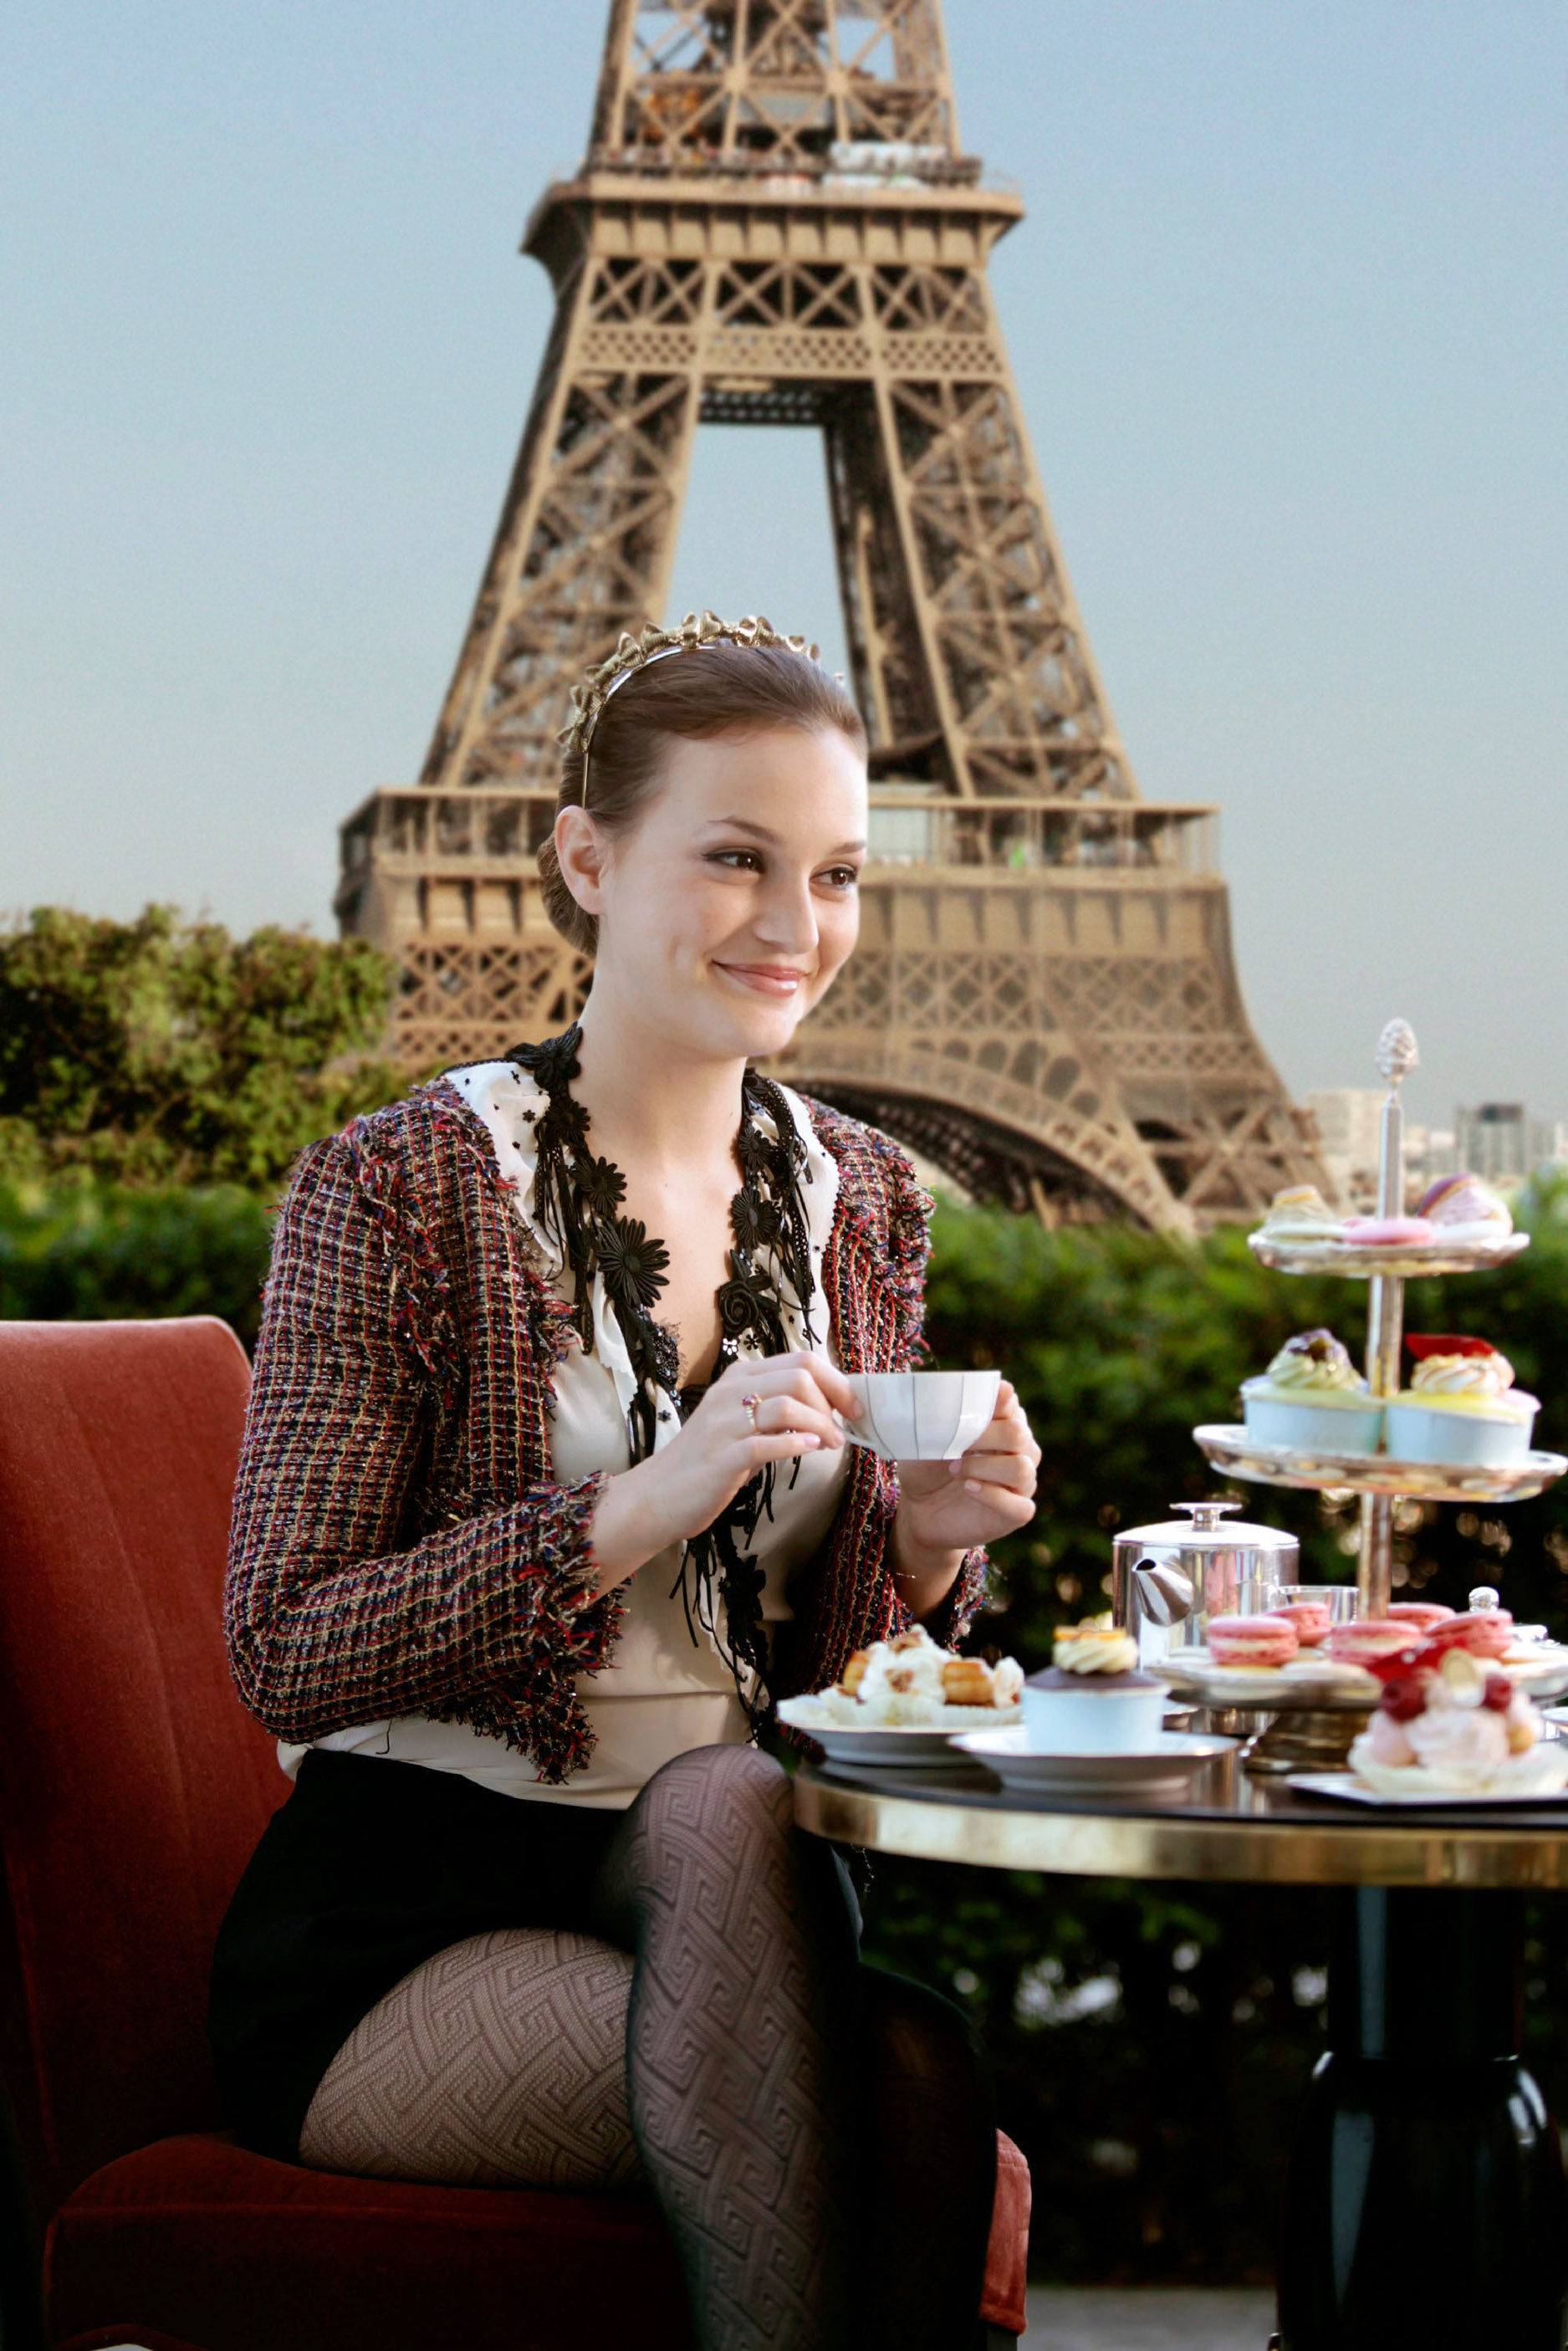 Blair sipping tea in front of the Eiffel Tower